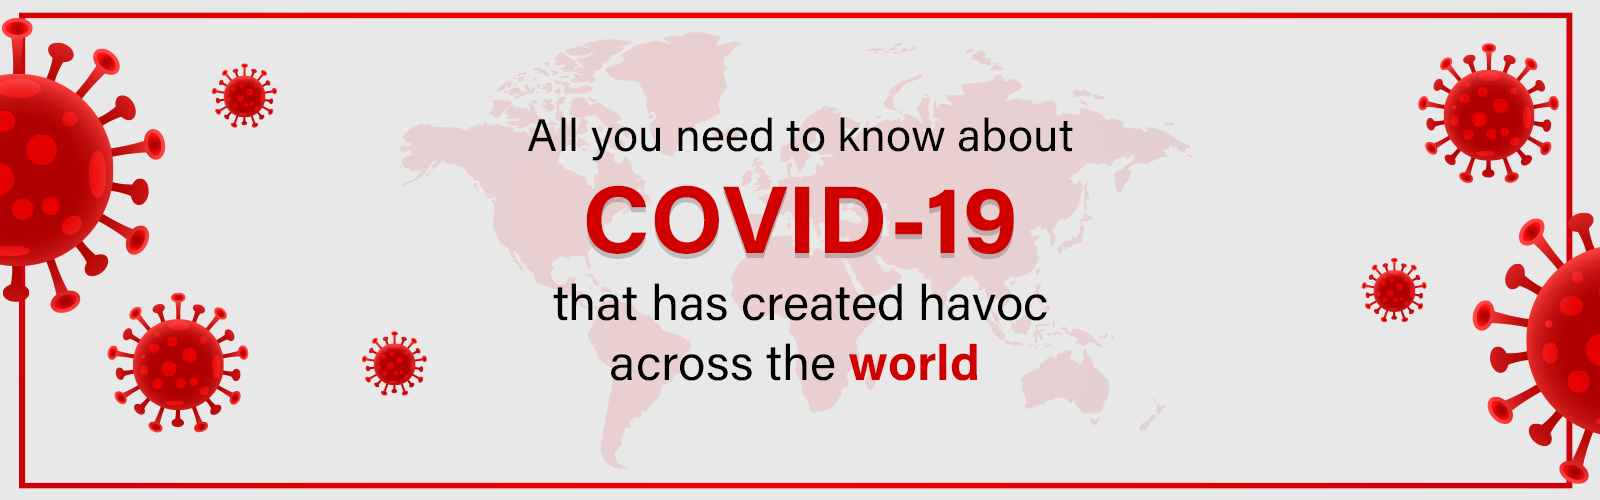 All you need to know about COVID-19 that has created havoc across the world - CGR International School - Best School in Madhapur / Hyderabad